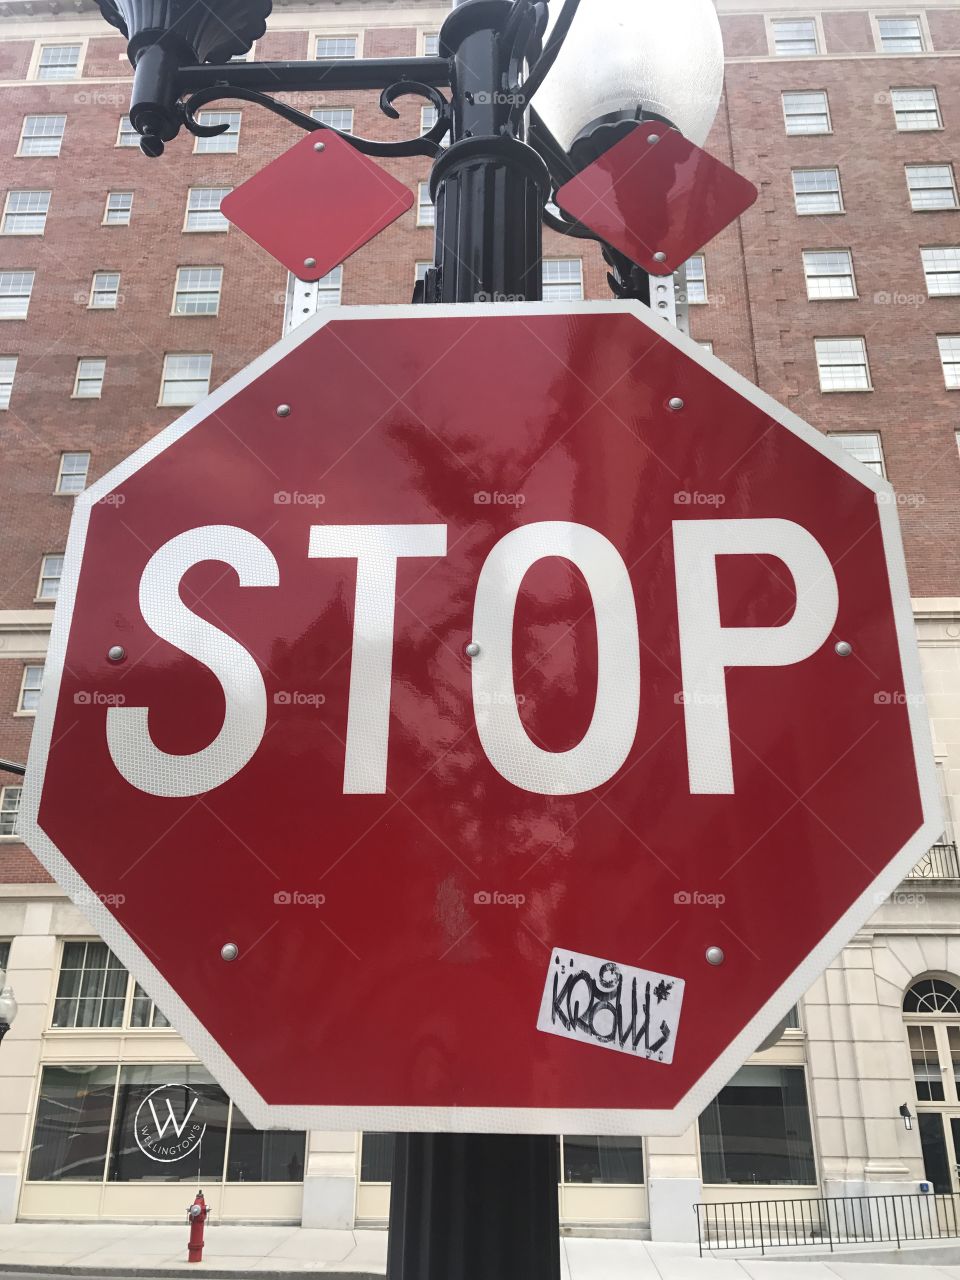 A stop sign in Albany NY